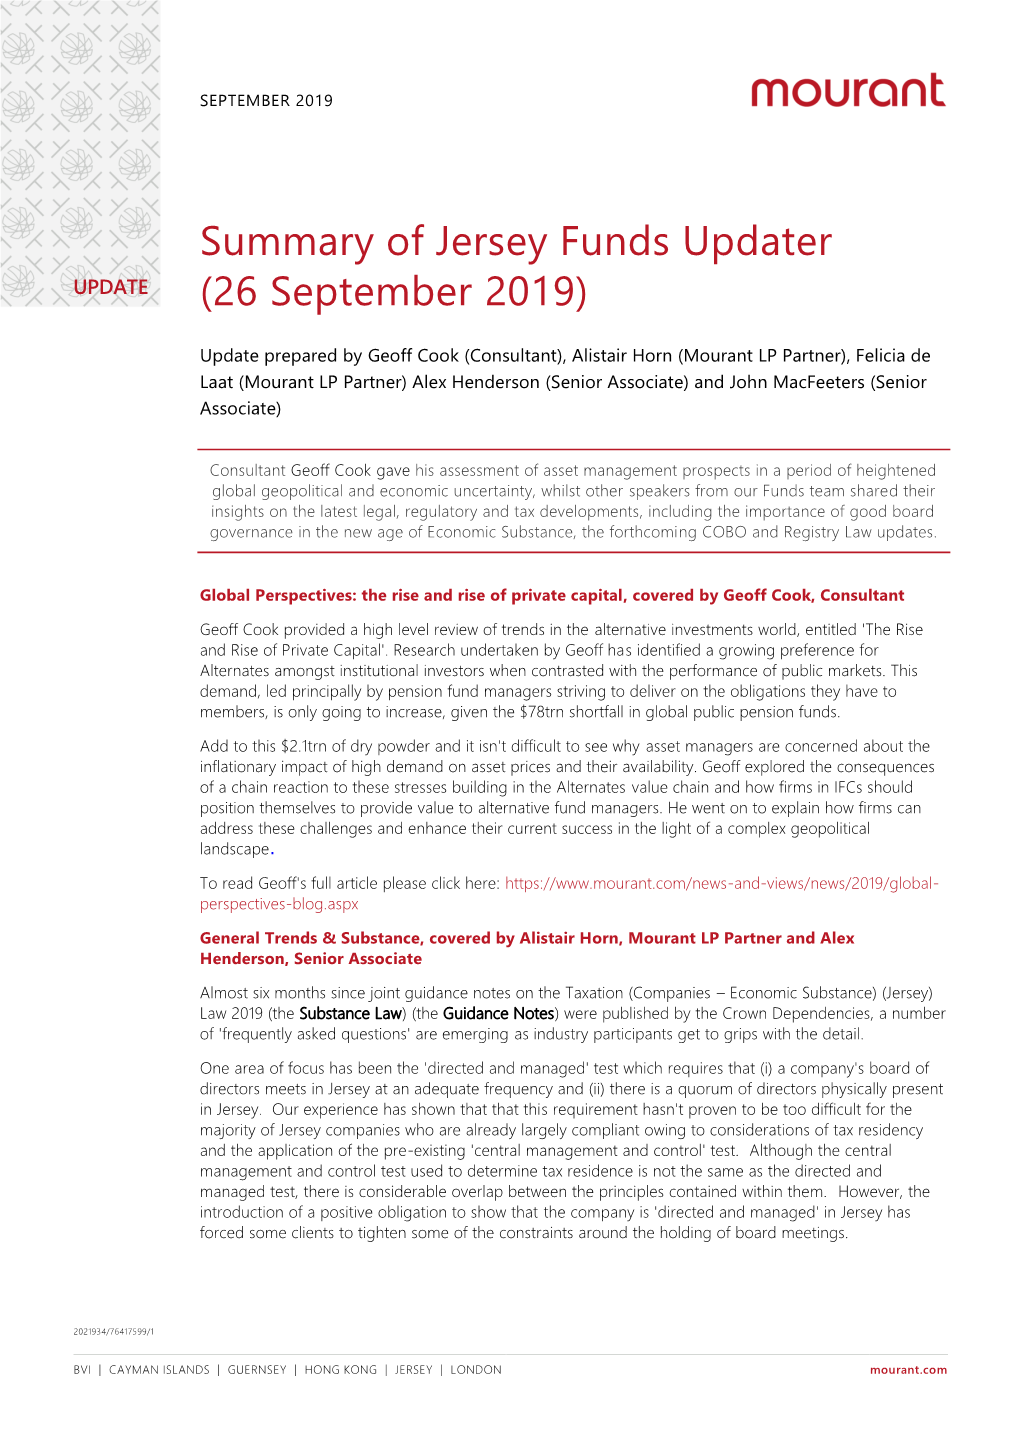 Summary of Jersey Funds Updater (26 September 2019)